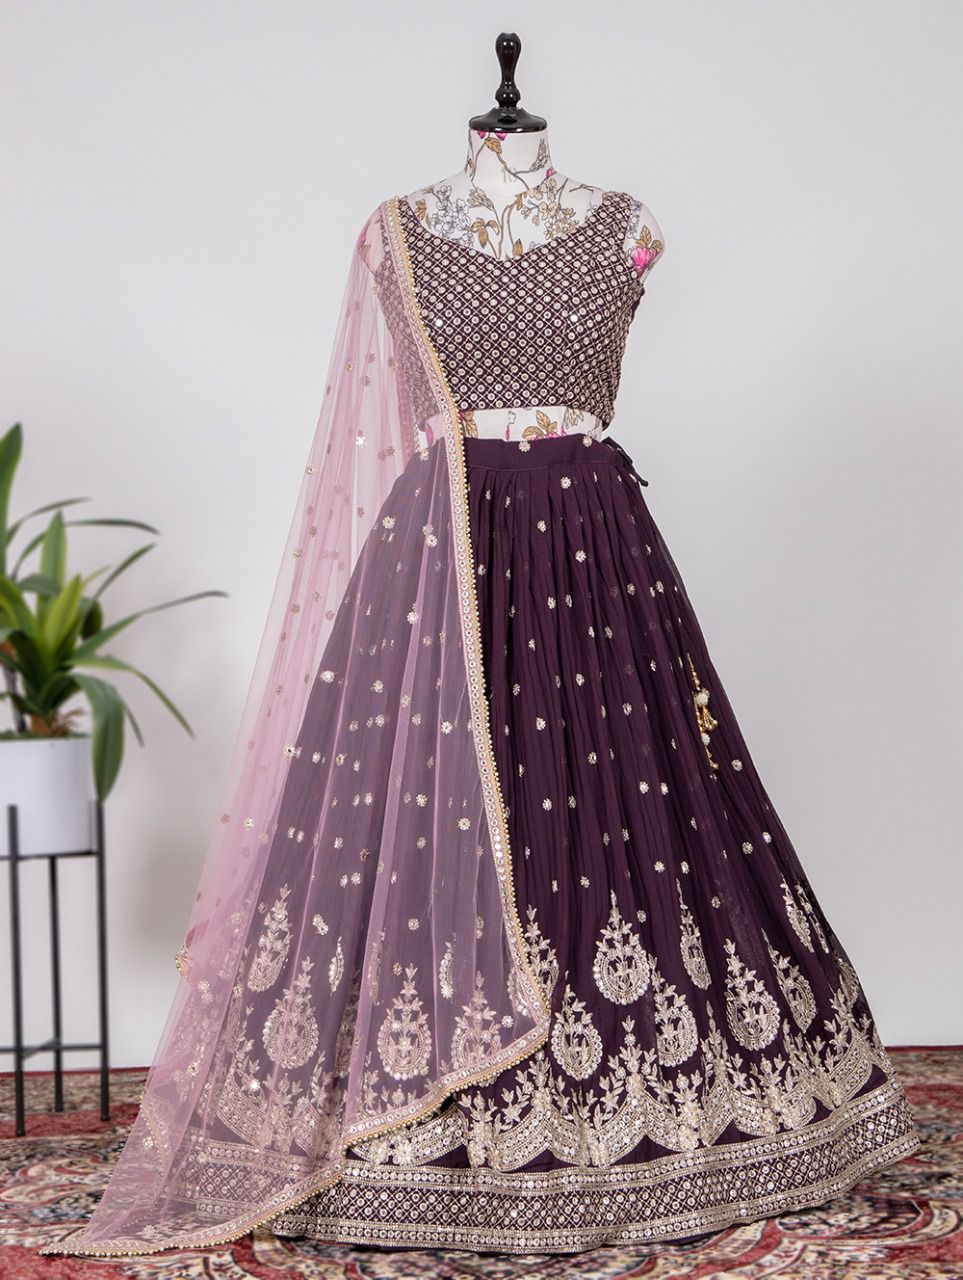 Stunning Bridal Lehengas & Sarees for your Intimate Wedding!